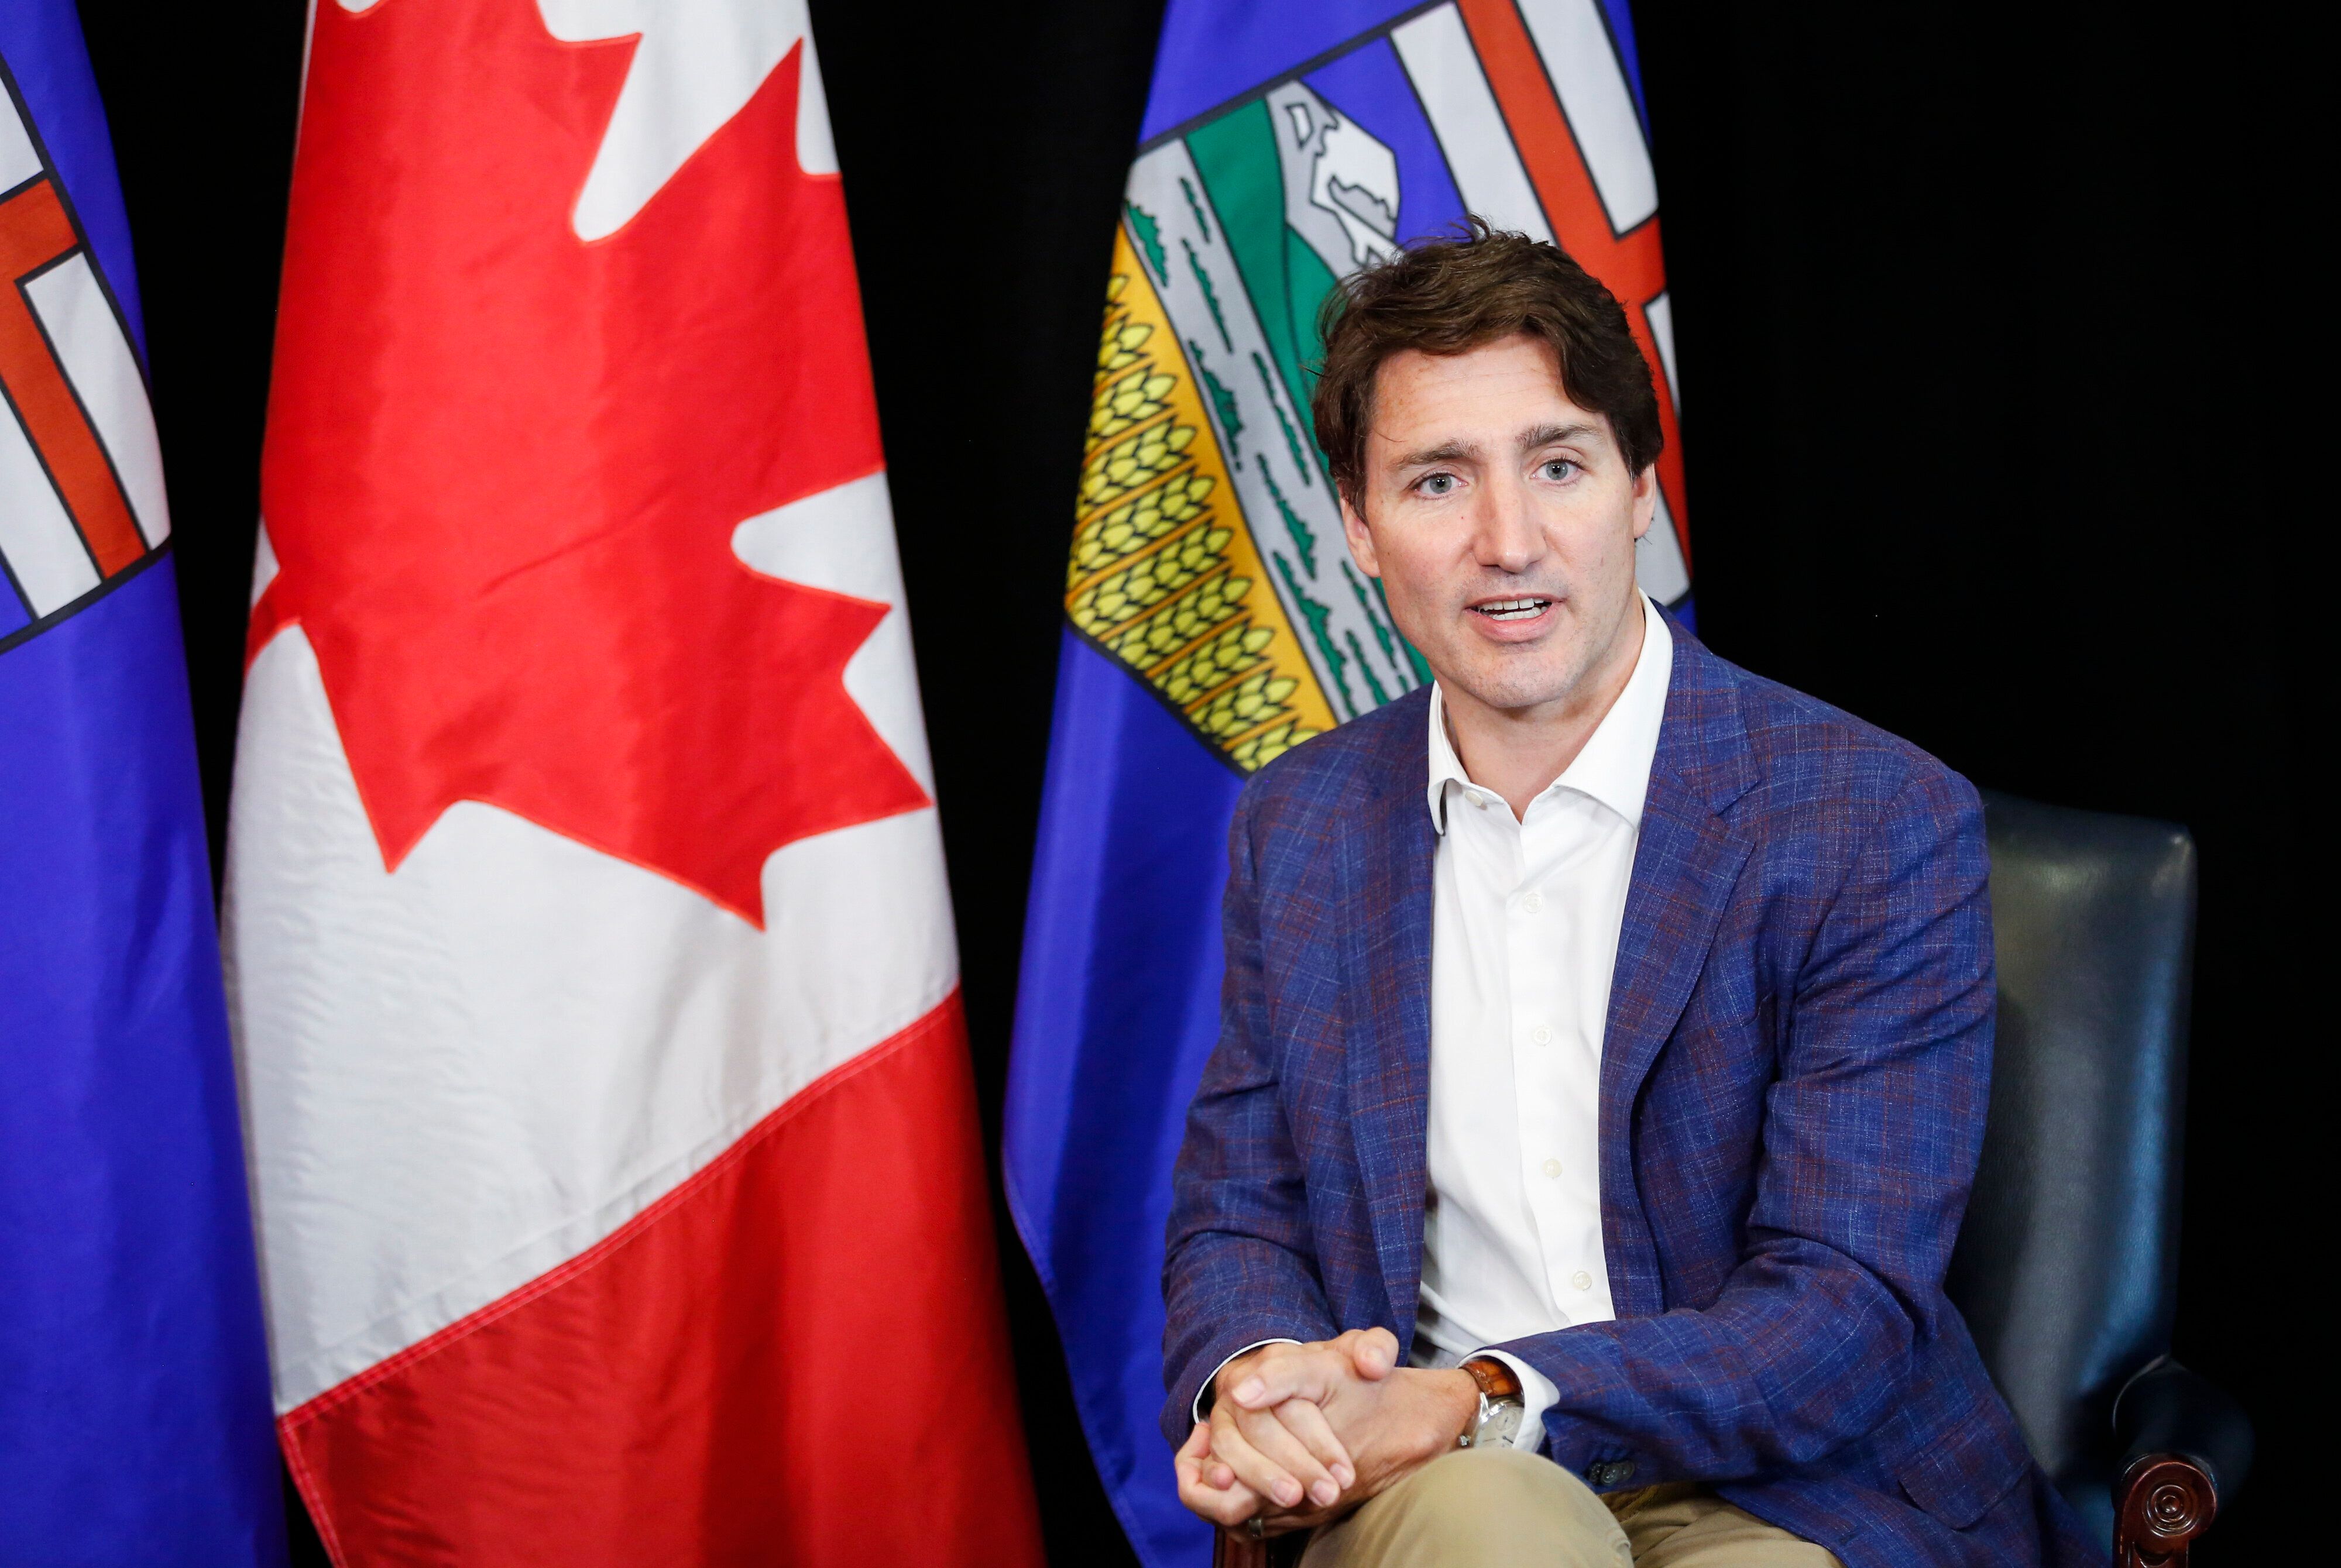 Canadian Prime Minister Justin Trudeau announced on Thursday&nbsp;that if Canada&rsquo;s current positive path of vaccination